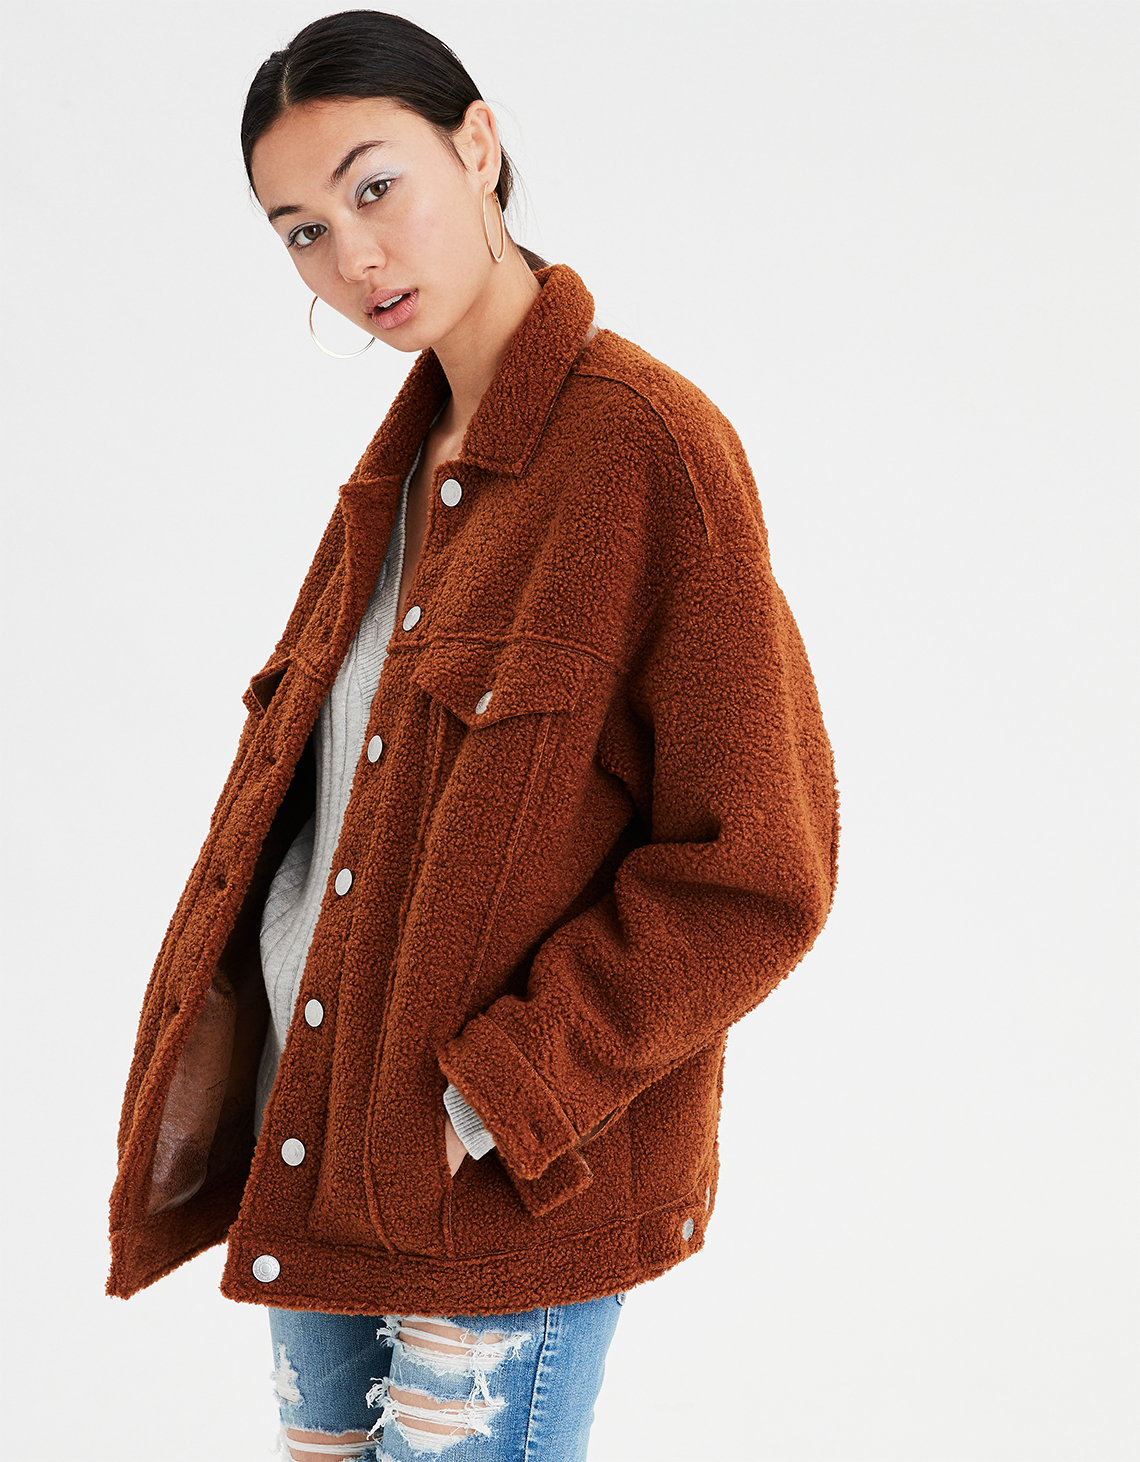 36 Stylish Things That Are Somehow Just As Cozy As They Are Cute